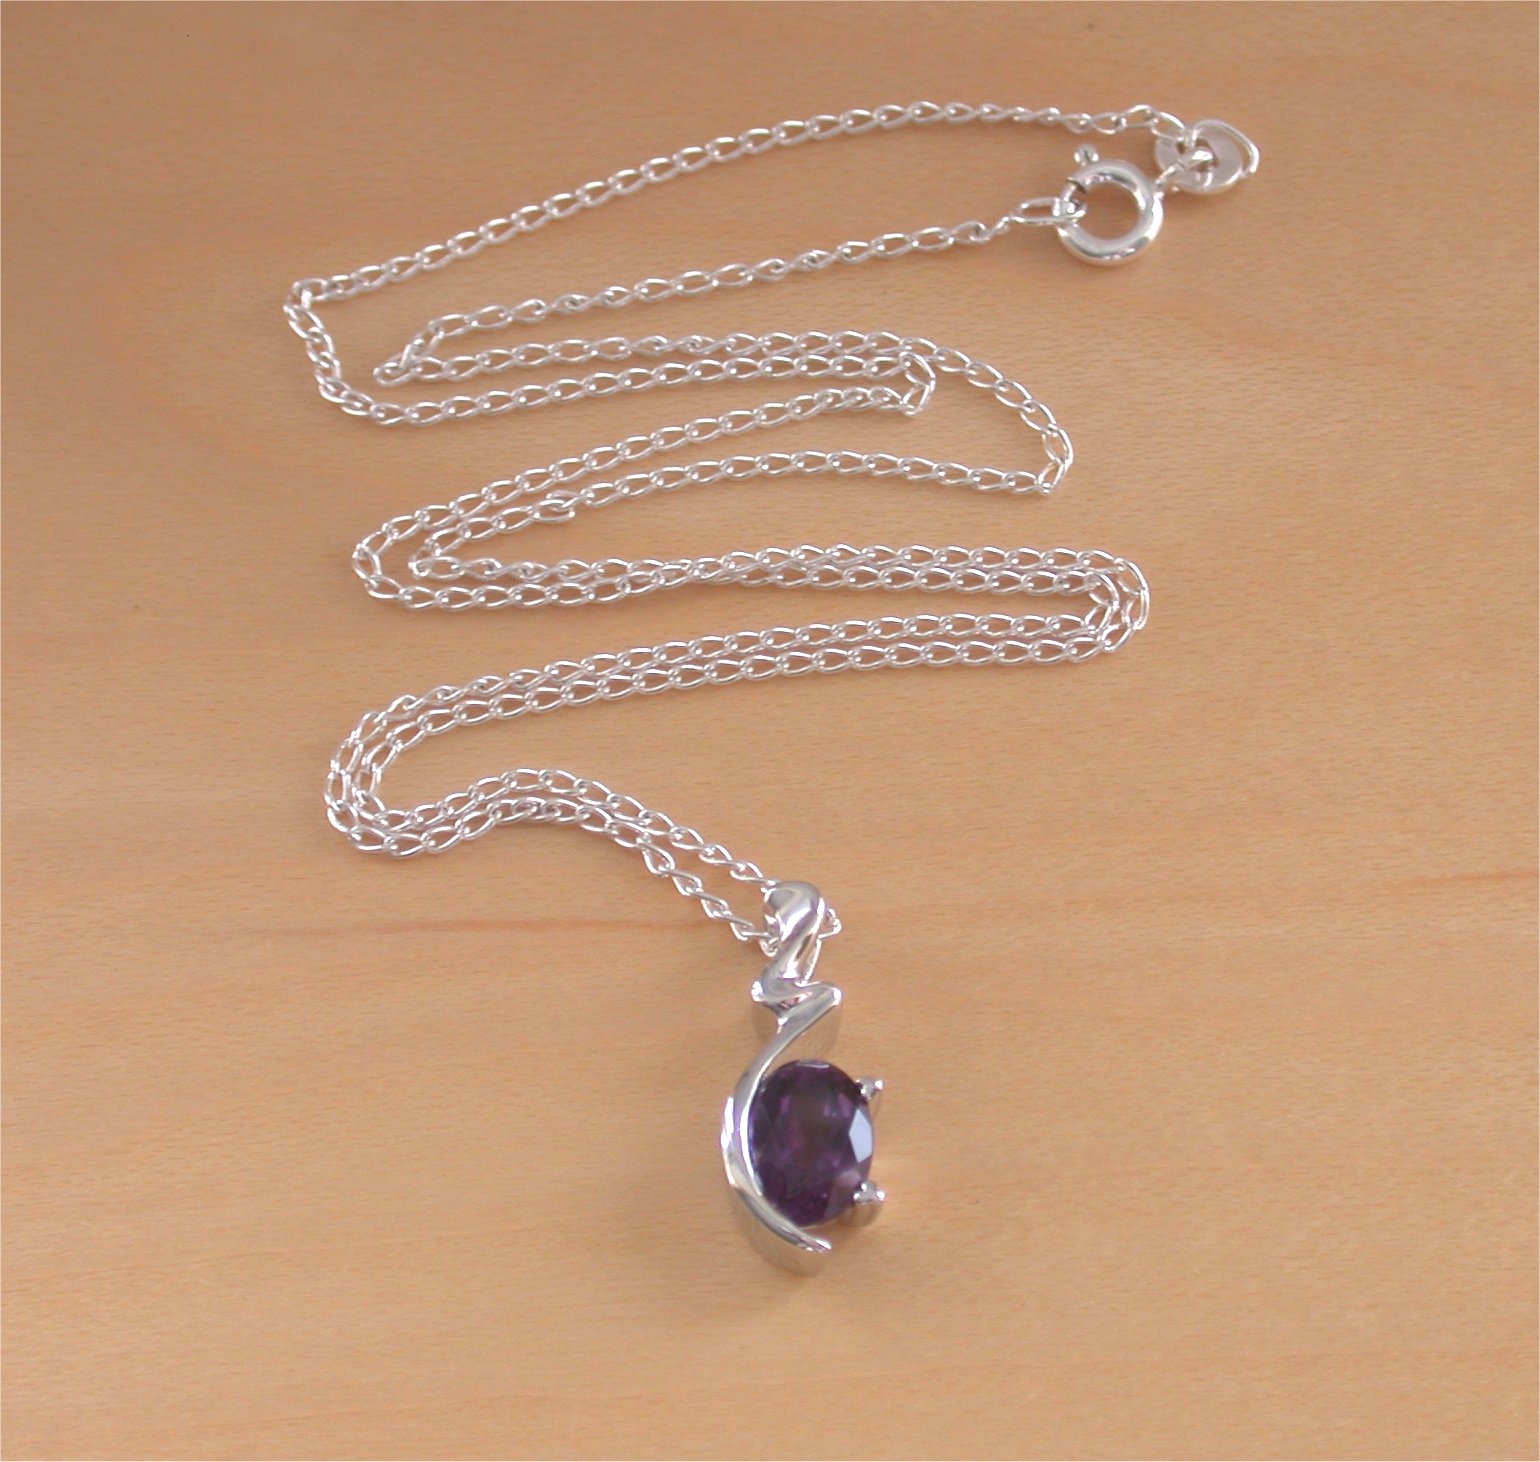 MADE IN UK STERLING SILVER AMETHYST OVAL LOCKET PENDANT WITH 18" CHAIN